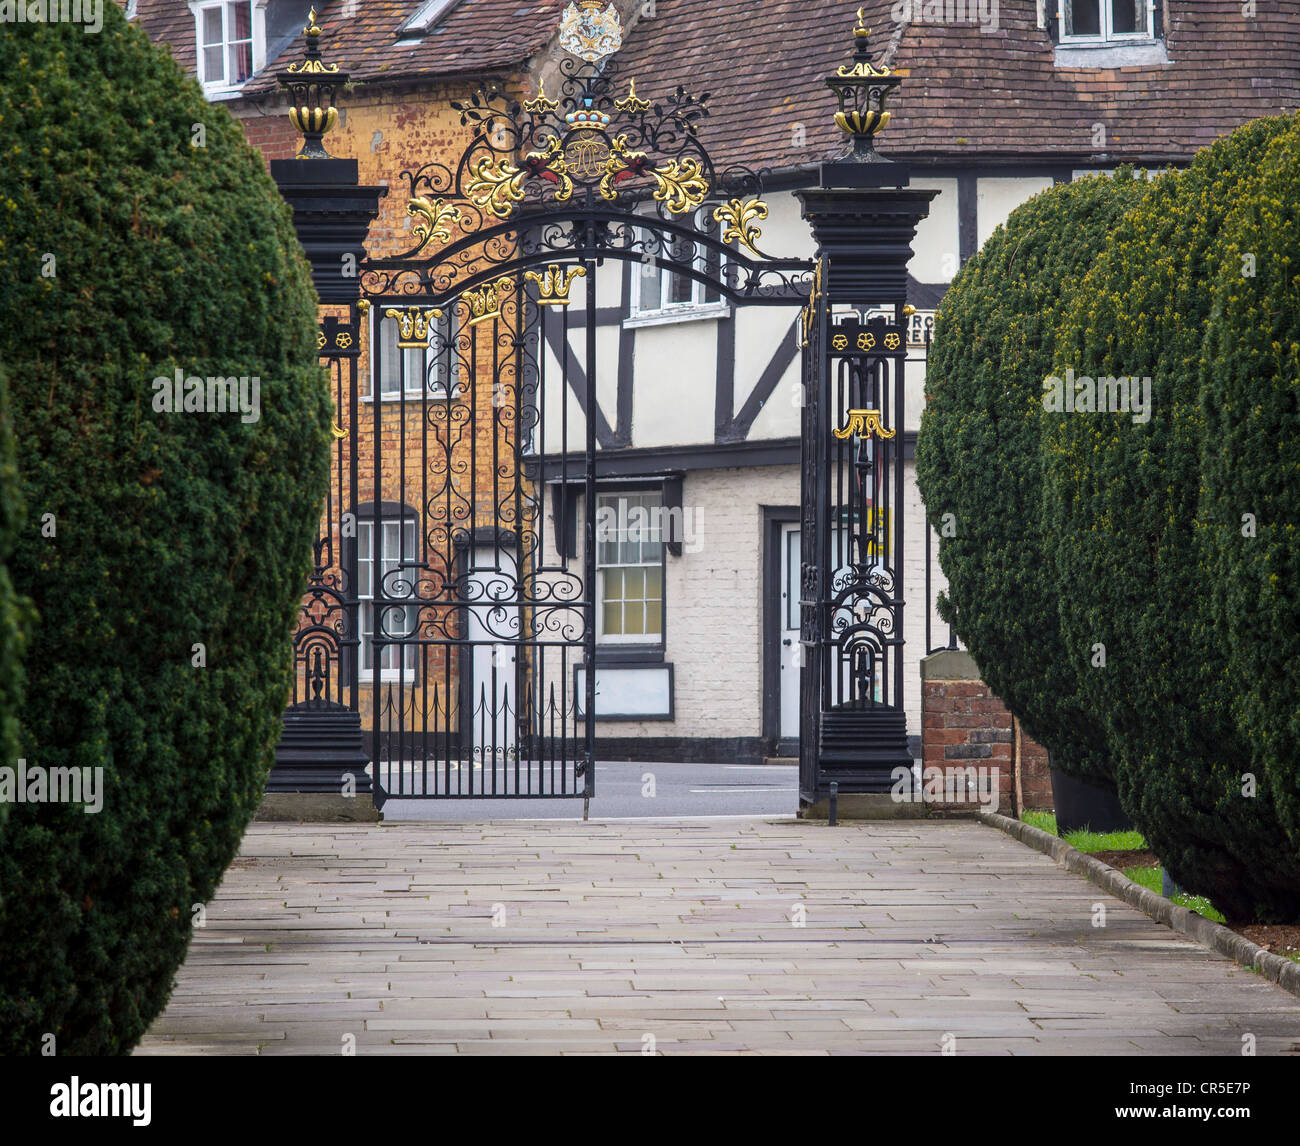 The Ornamental wrought iron gates at the North Entrance to Tewkesbury Abbey, Gloucestershire, England, UK. Stock Photo